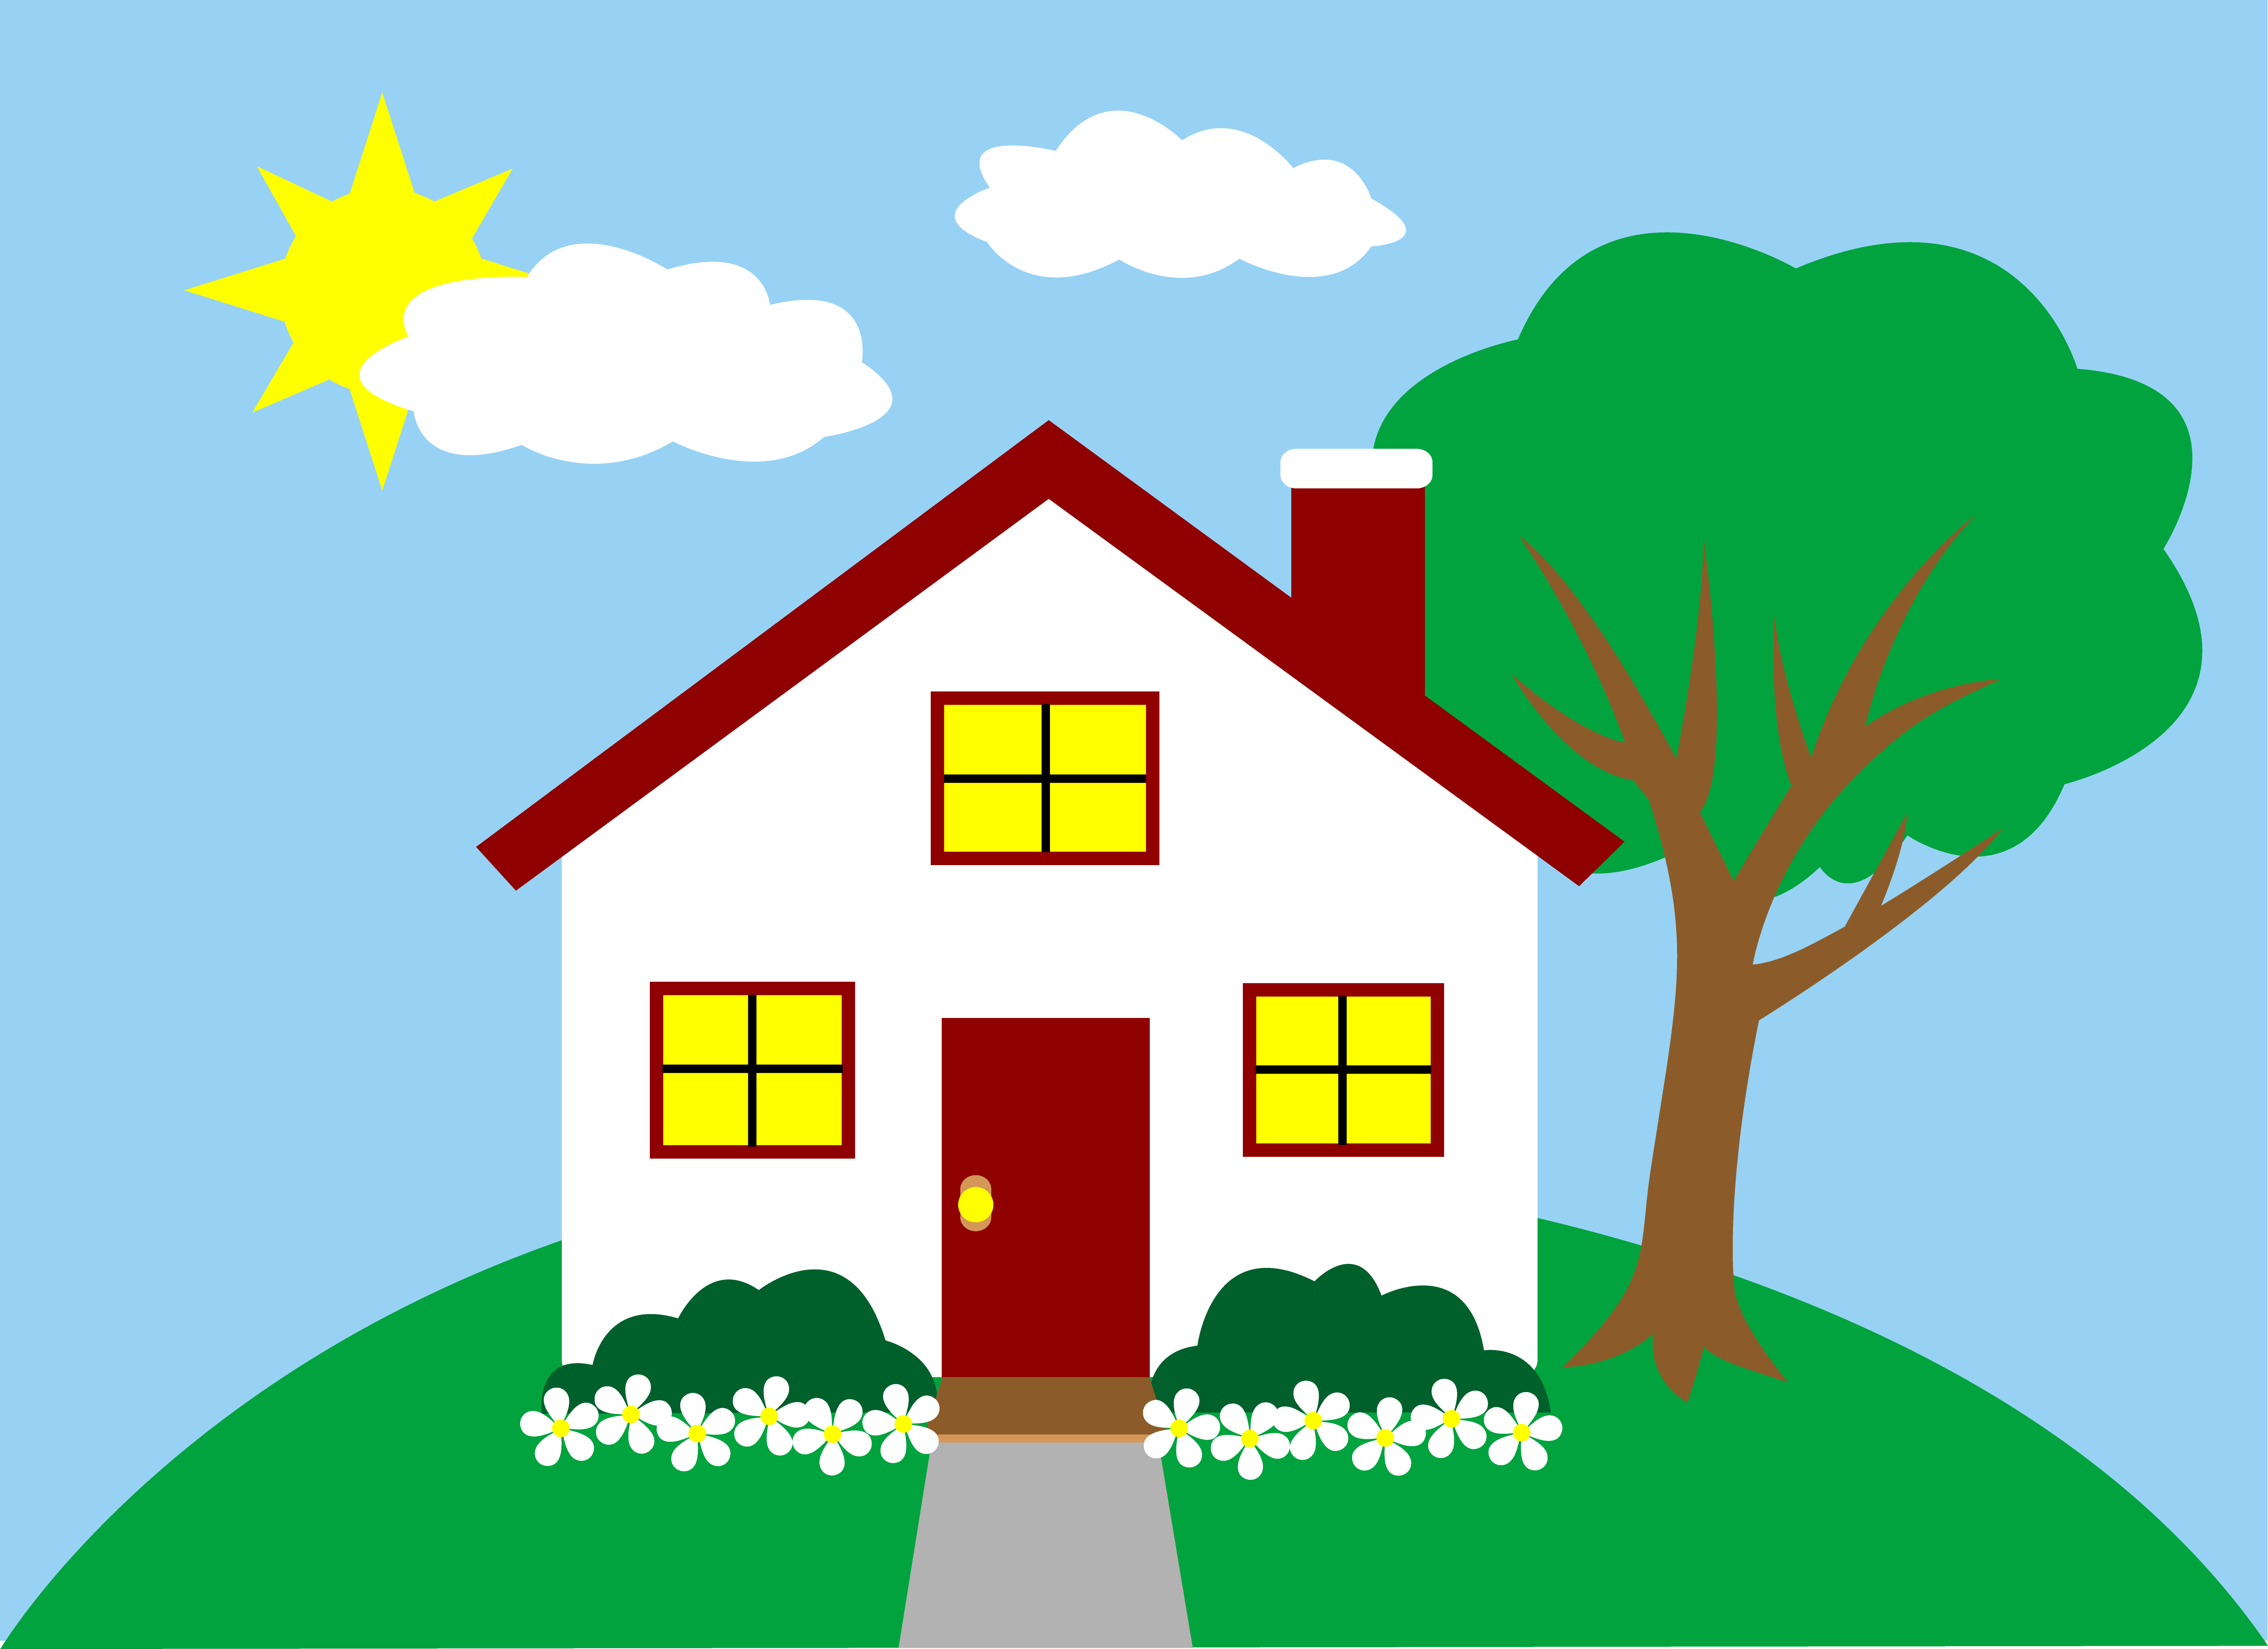 Clipart Houses Apartments | Clipart Panda - Free Clipart Images